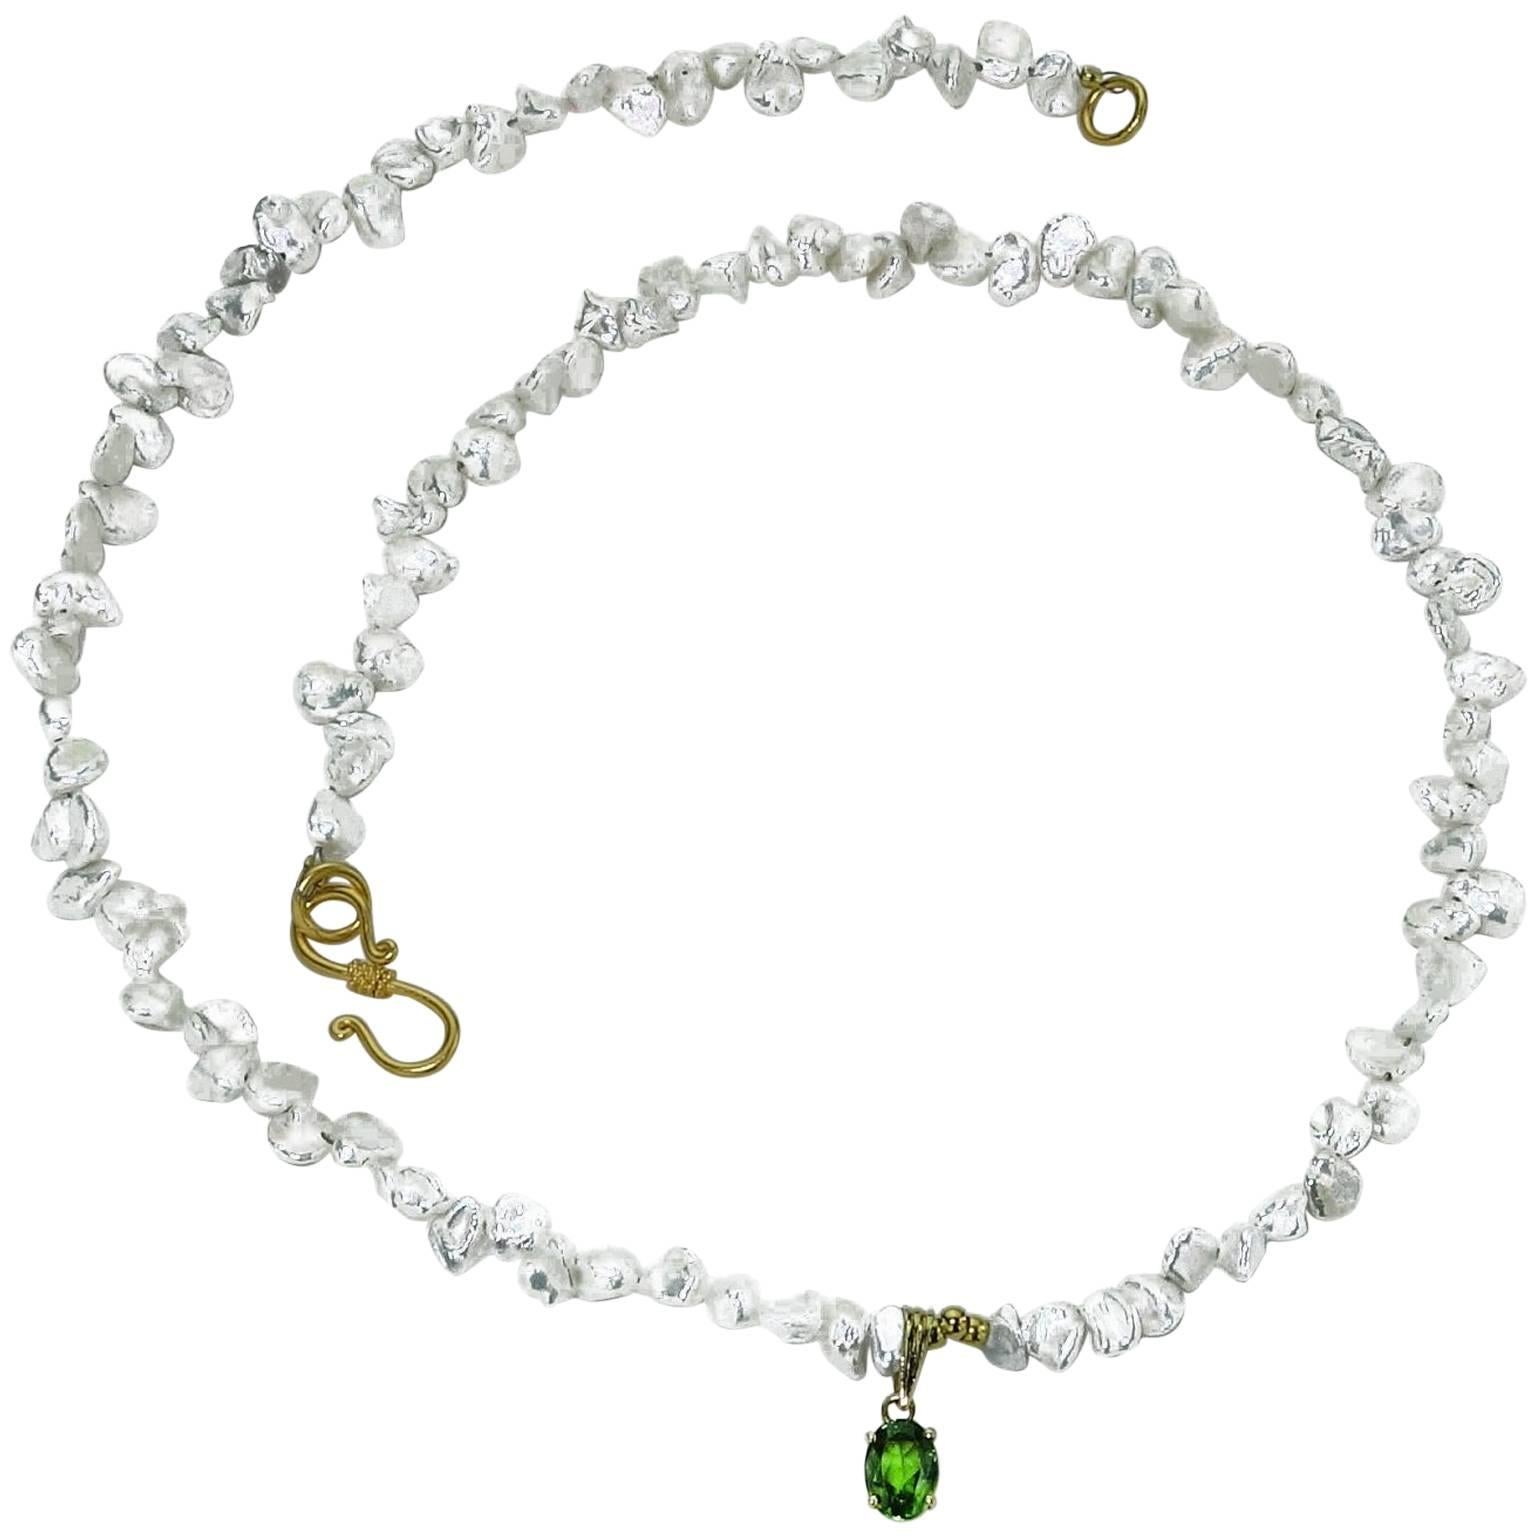 Bead AJD Pearl Necklace with Green Tourmaline Pendant